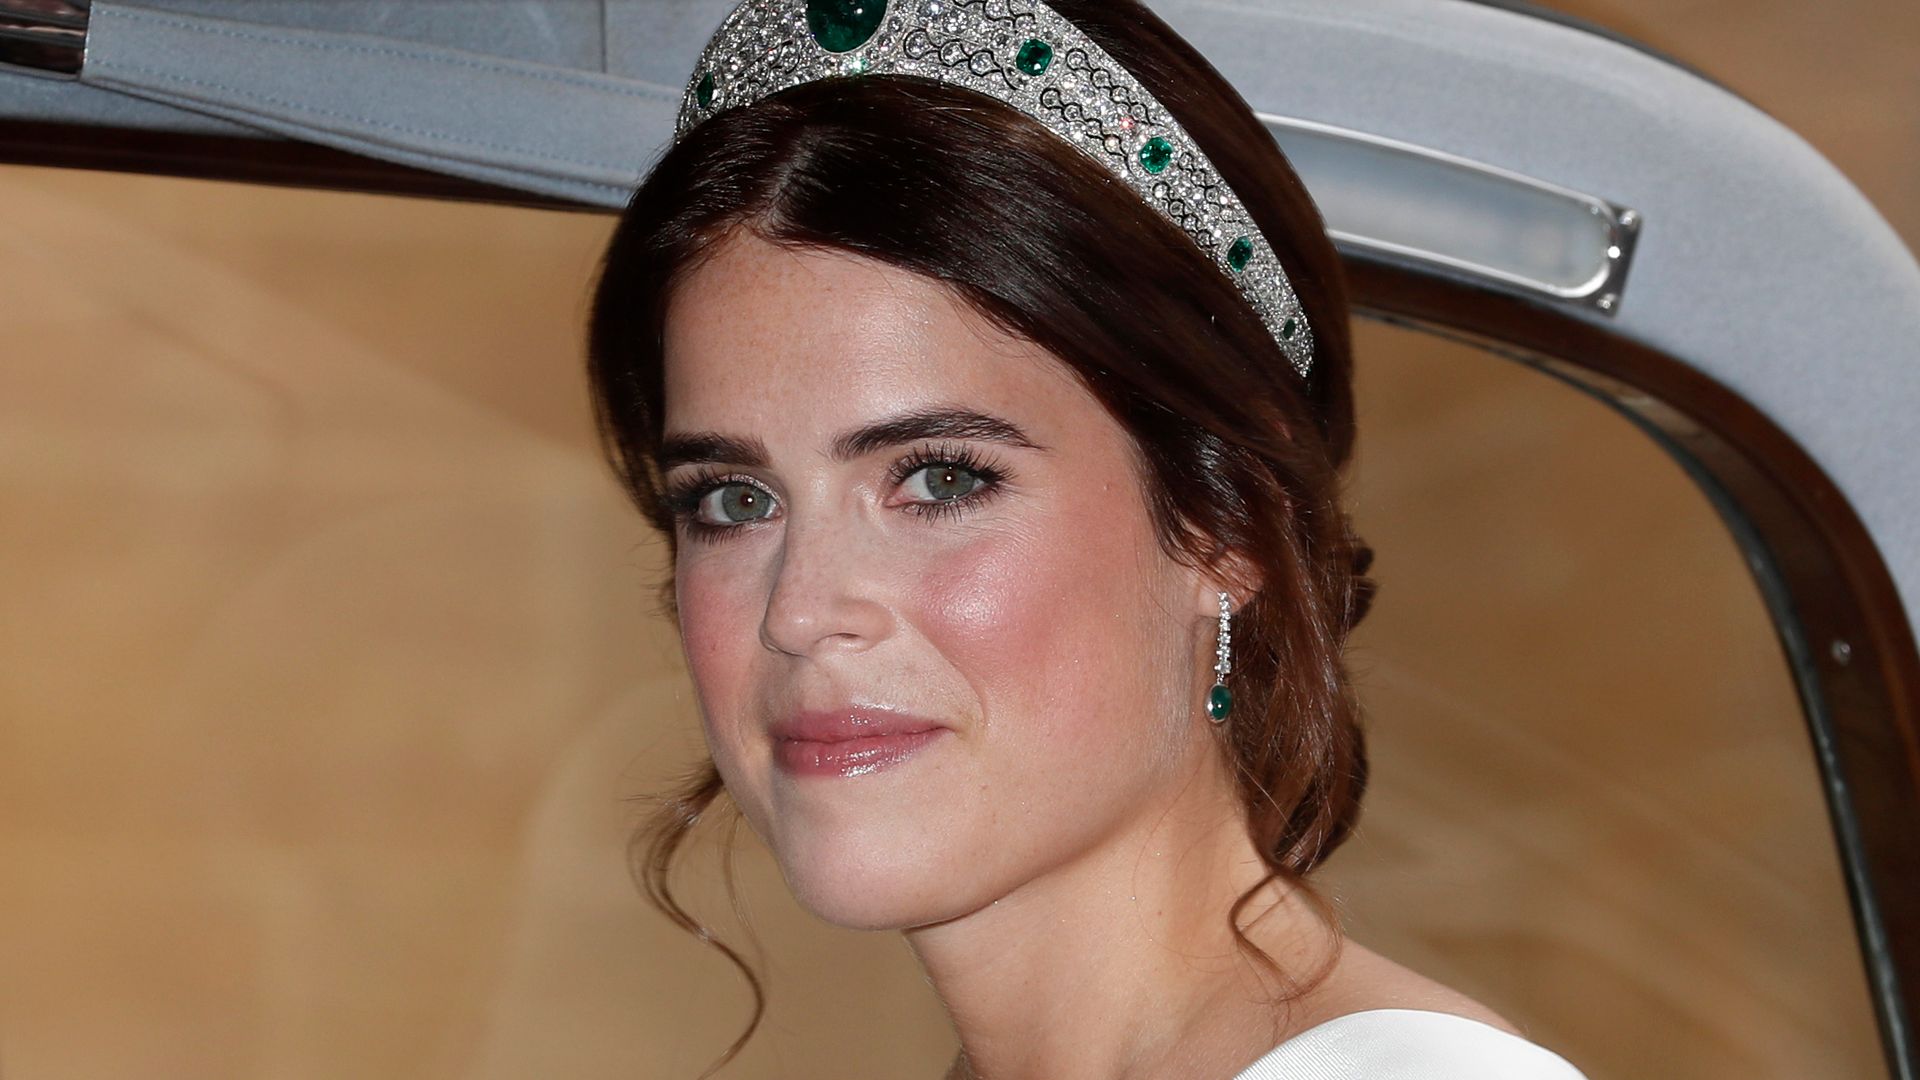 Princess Eugenie in her bridal tiara in a car in during her wedding day in 2018